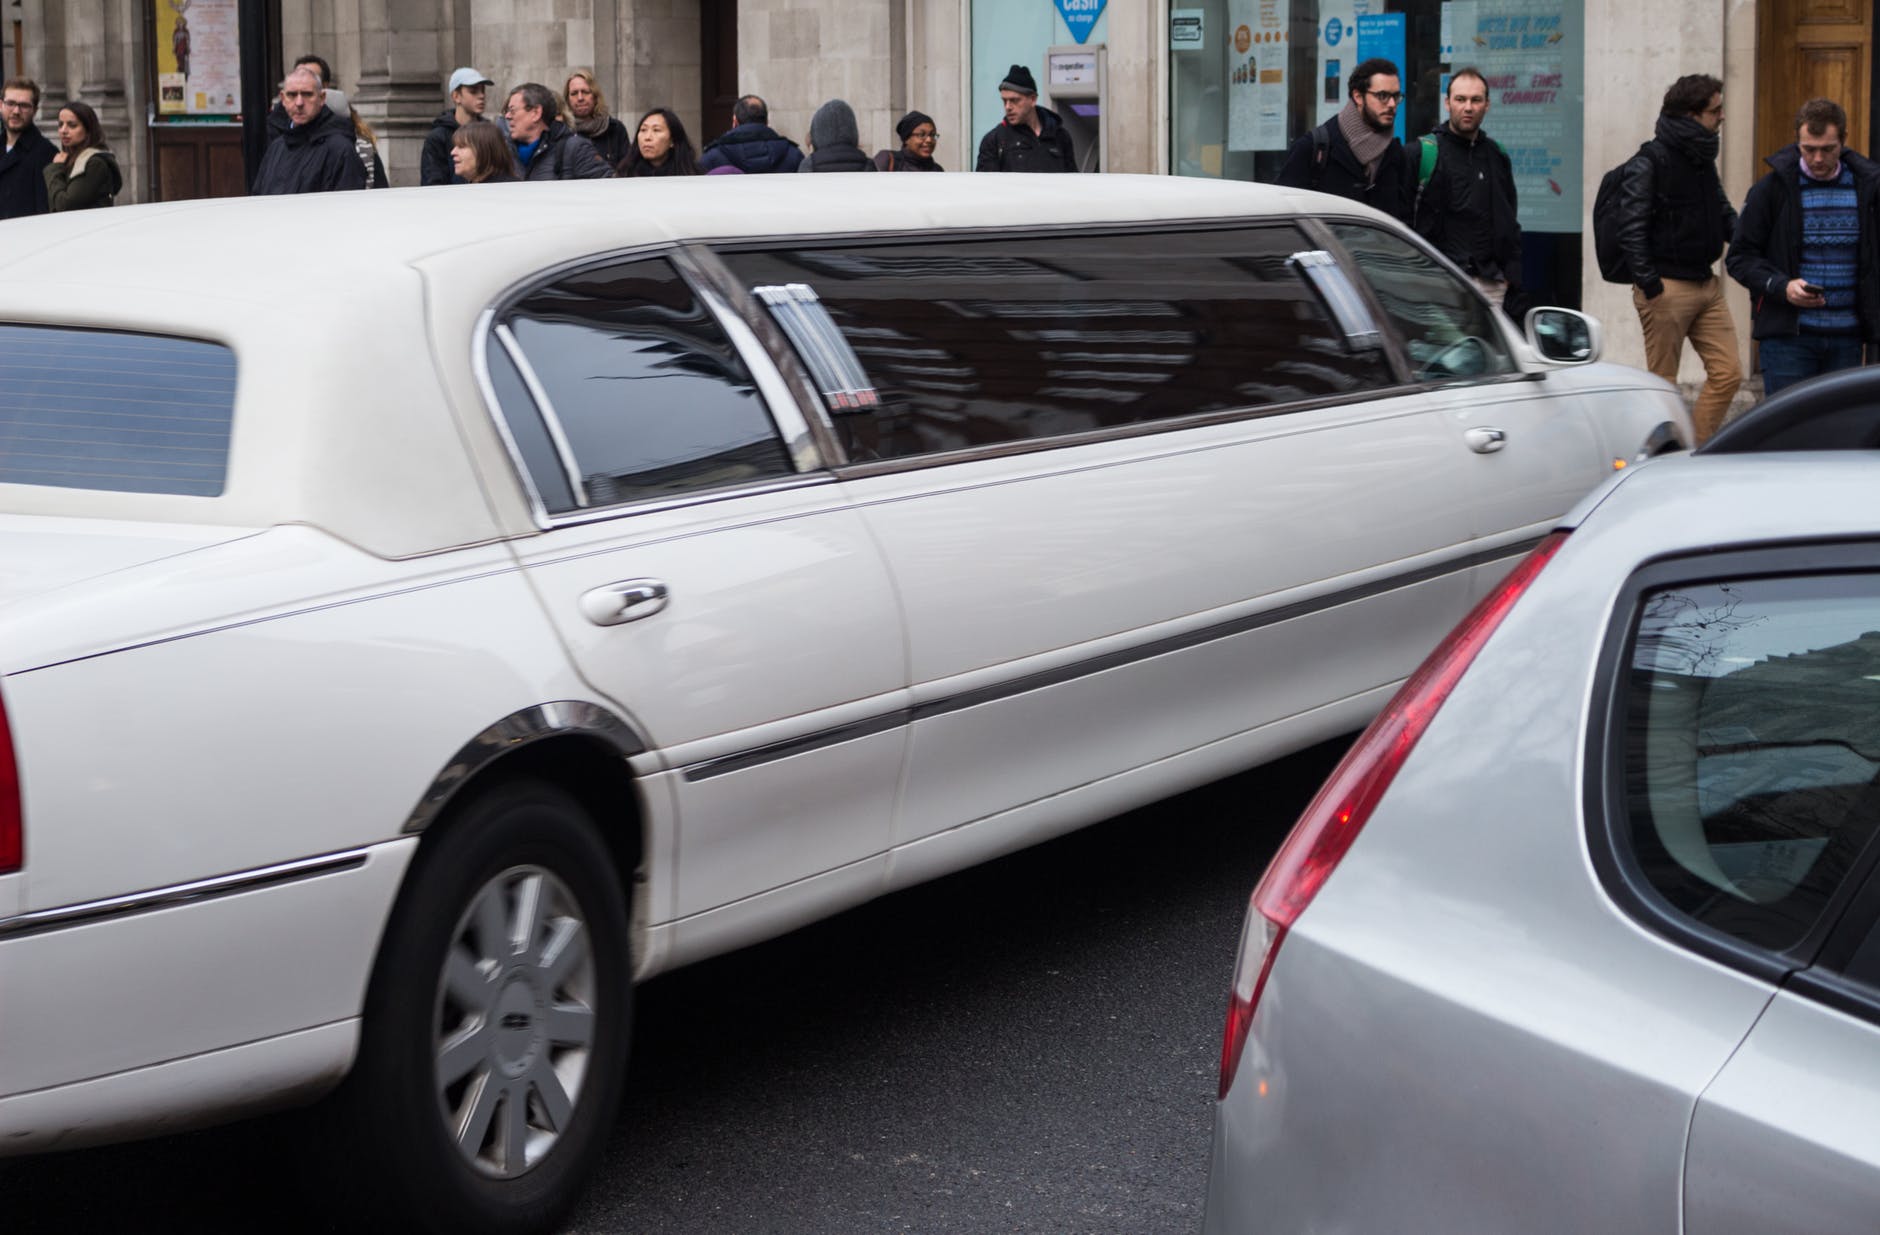 Why Consider Limo Services For Your Trip